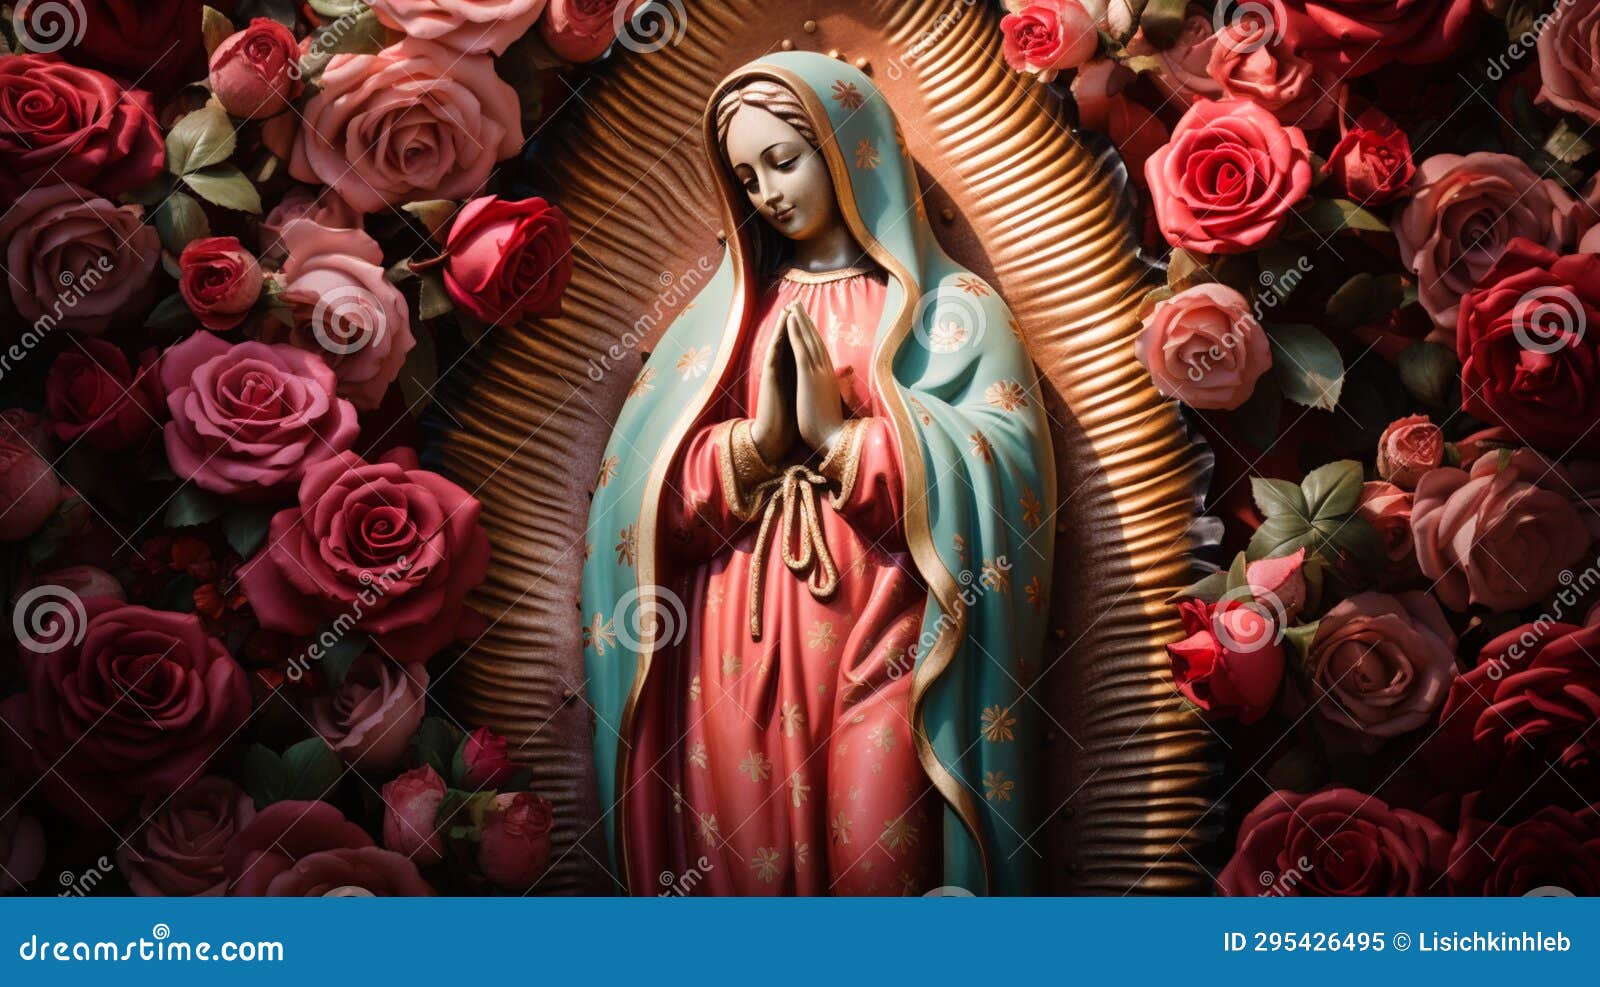 statue of saint mary of guadalupe (virgen de guadalupe) in honor of the celebration of the mexican holiday of